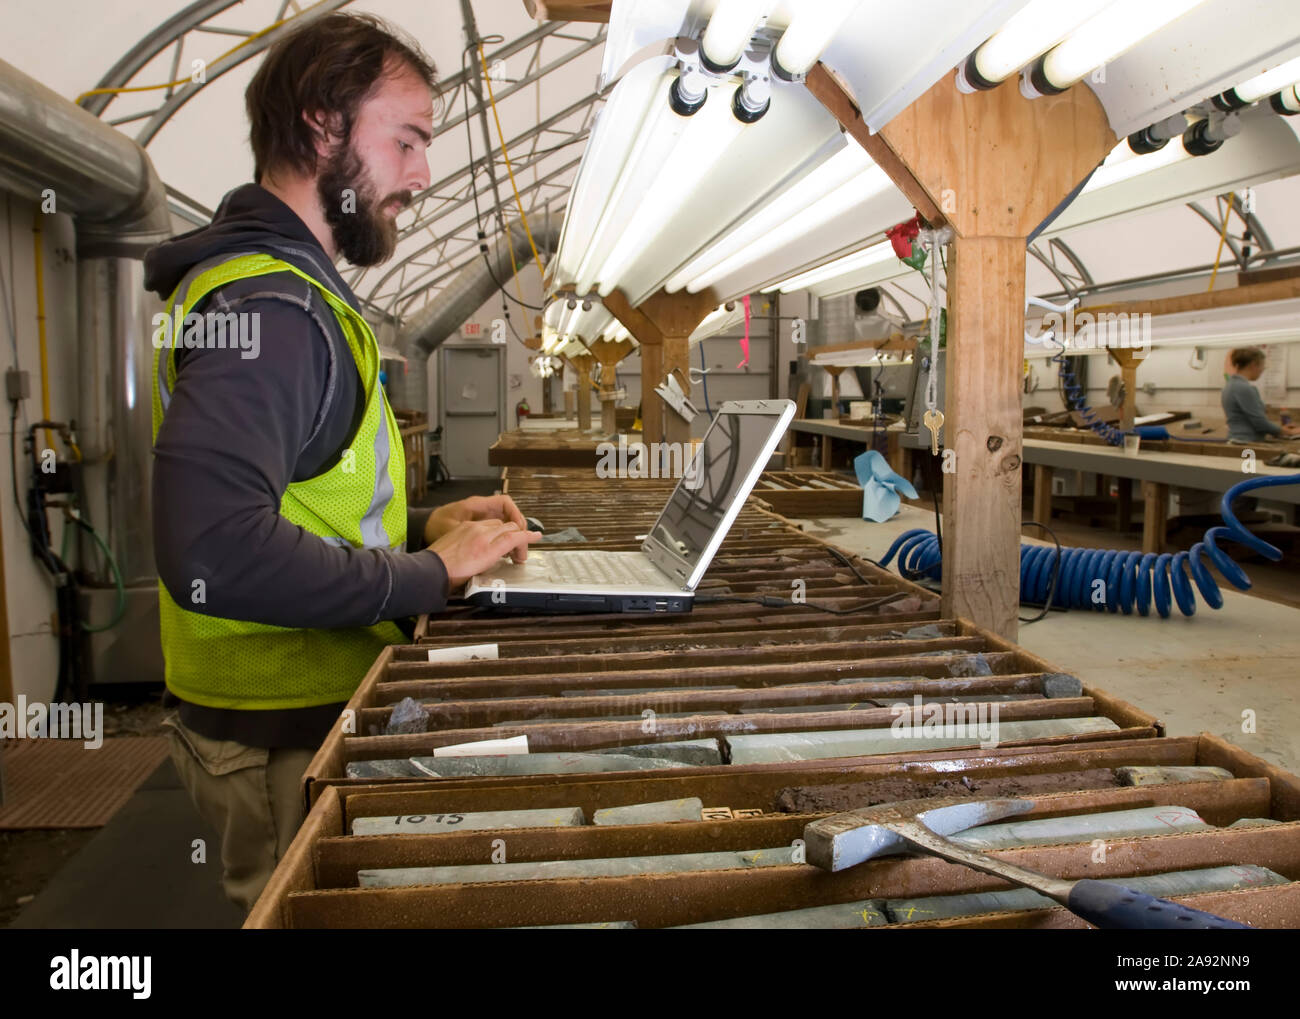 A Geologists Logs Data On Core Samples In A Remote Lab At The Pebble Mine Proposed Site Near Iliamna, Alaska Stock Photo